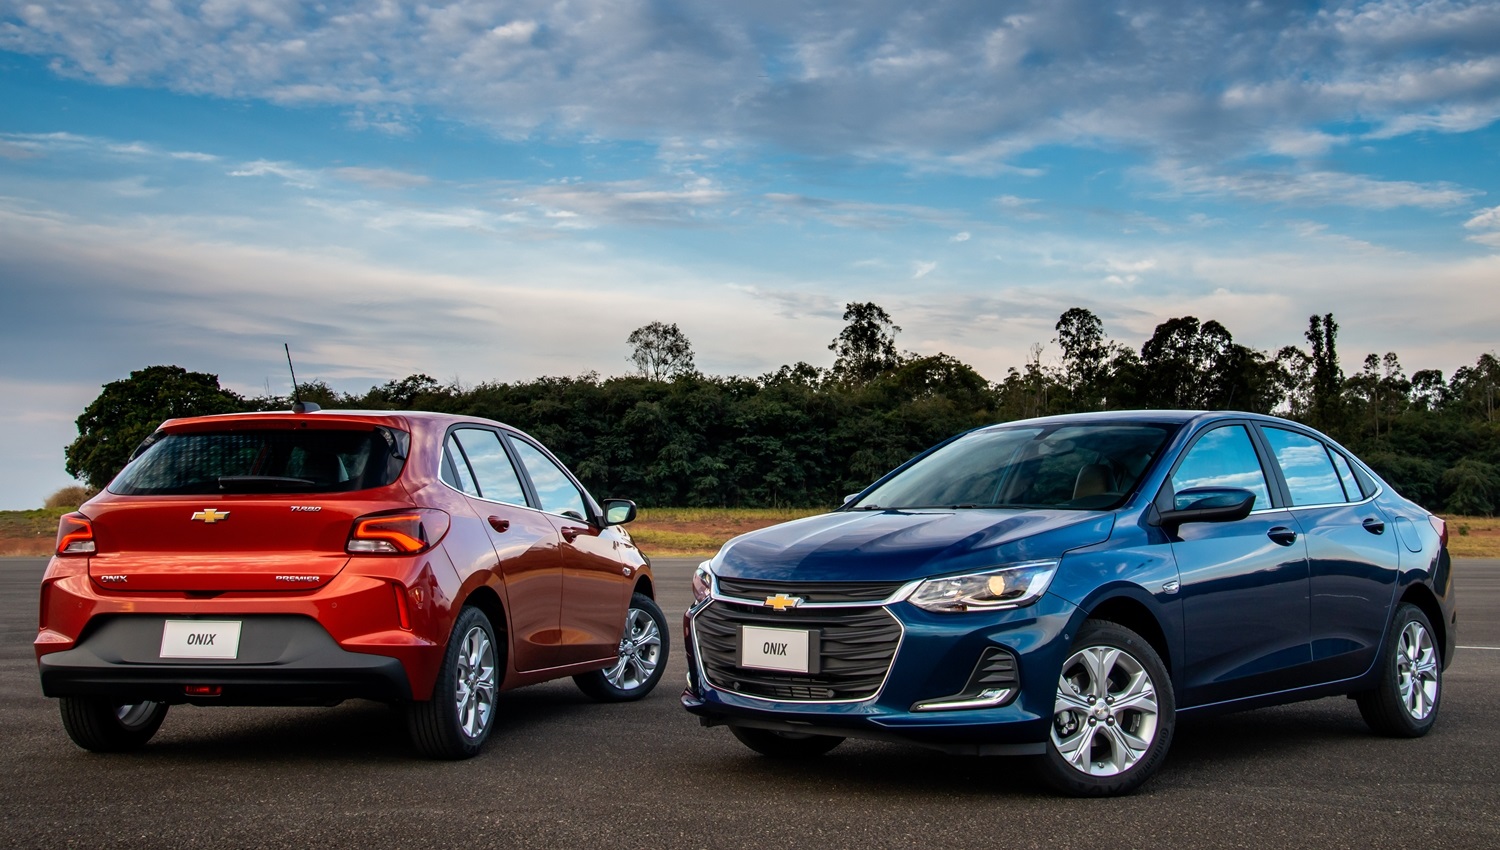 Chevrolet Onix Sets New Sales Record In Brazil